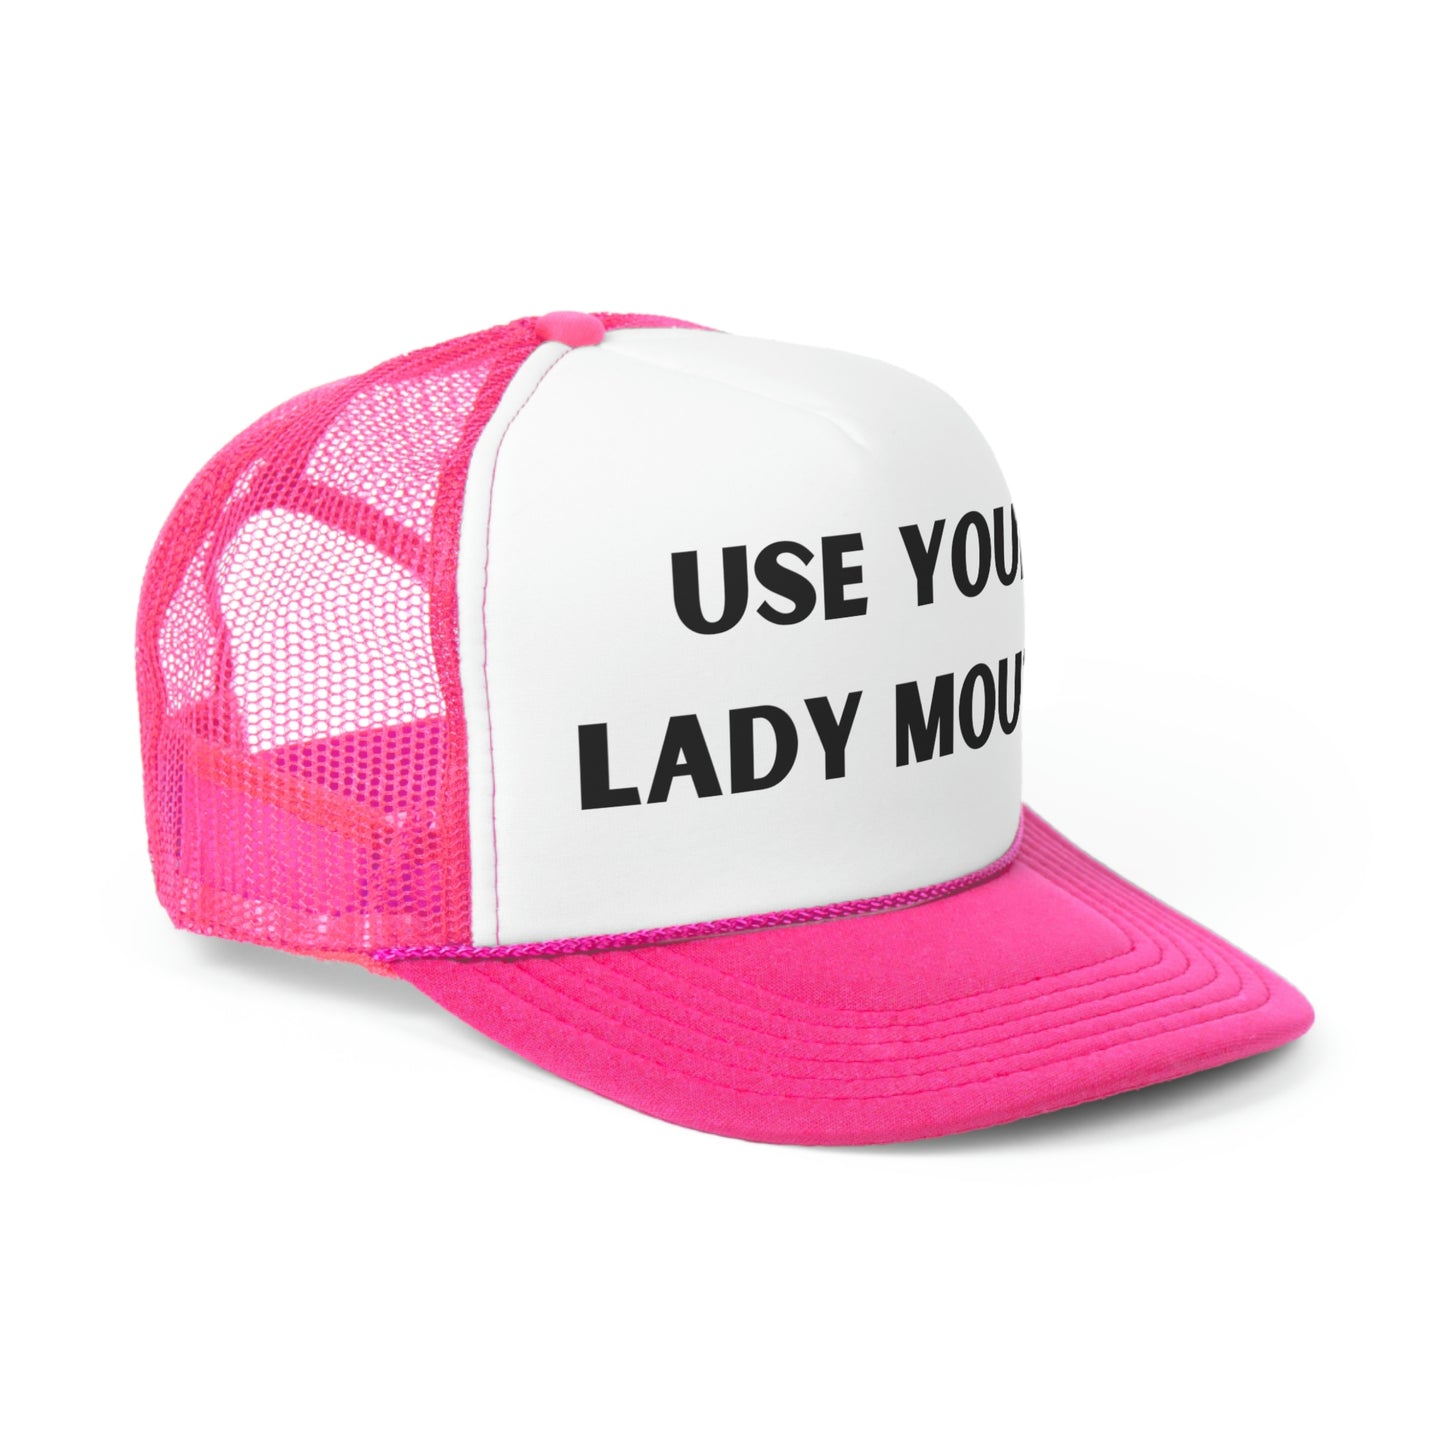 Use Your Lady Mouth